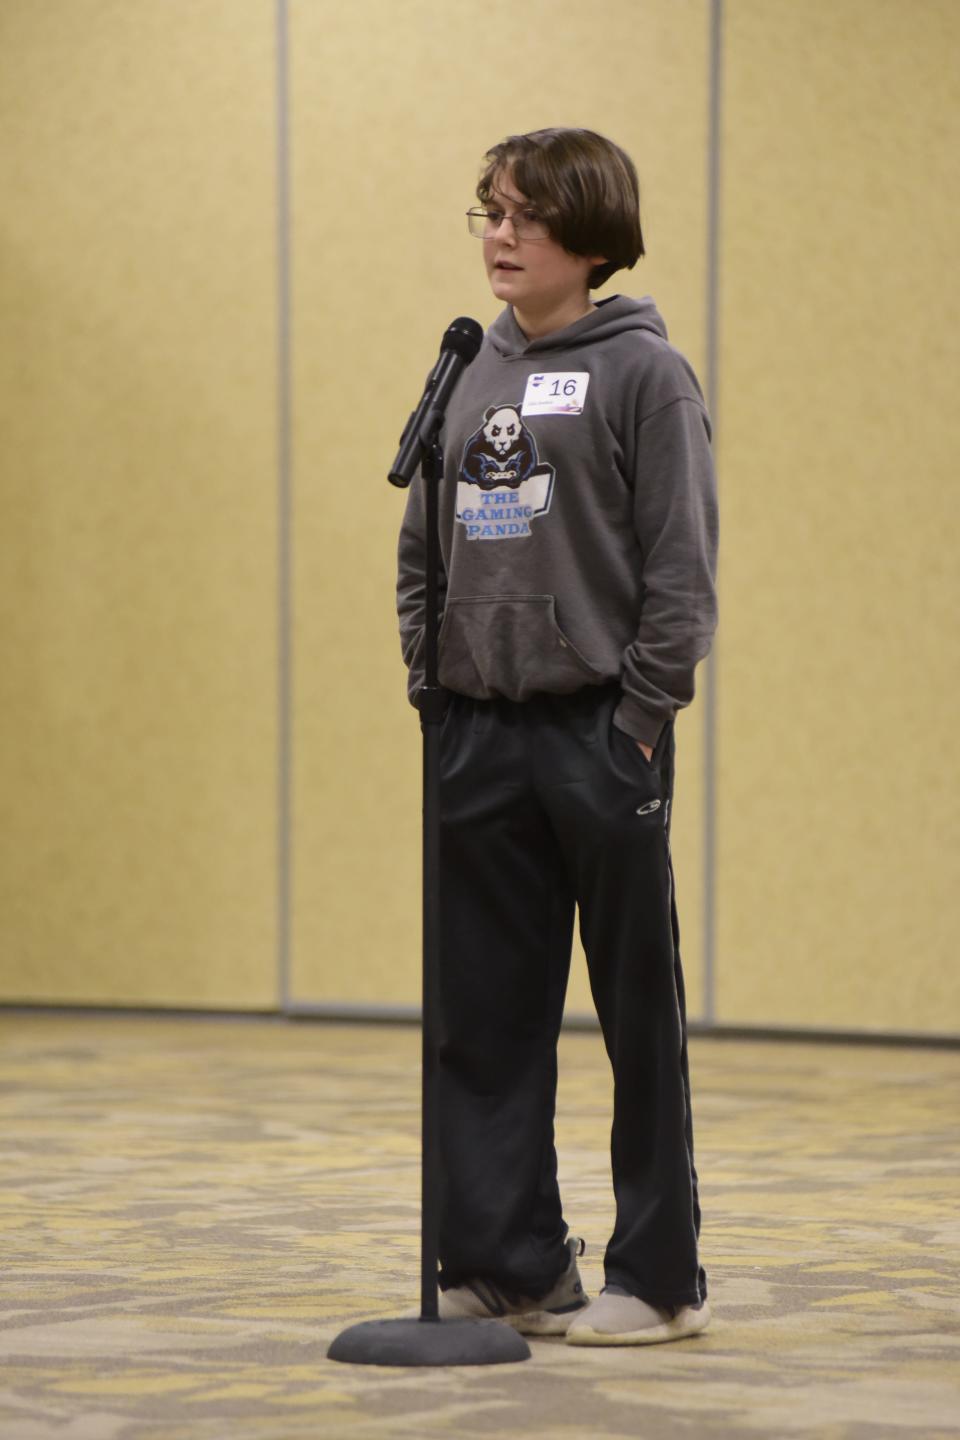 Odin Sombrio, a sixth-grade student from Eastern Elementary School in Lexington, finished in second place Thursday night during the tri-county spelling bee.